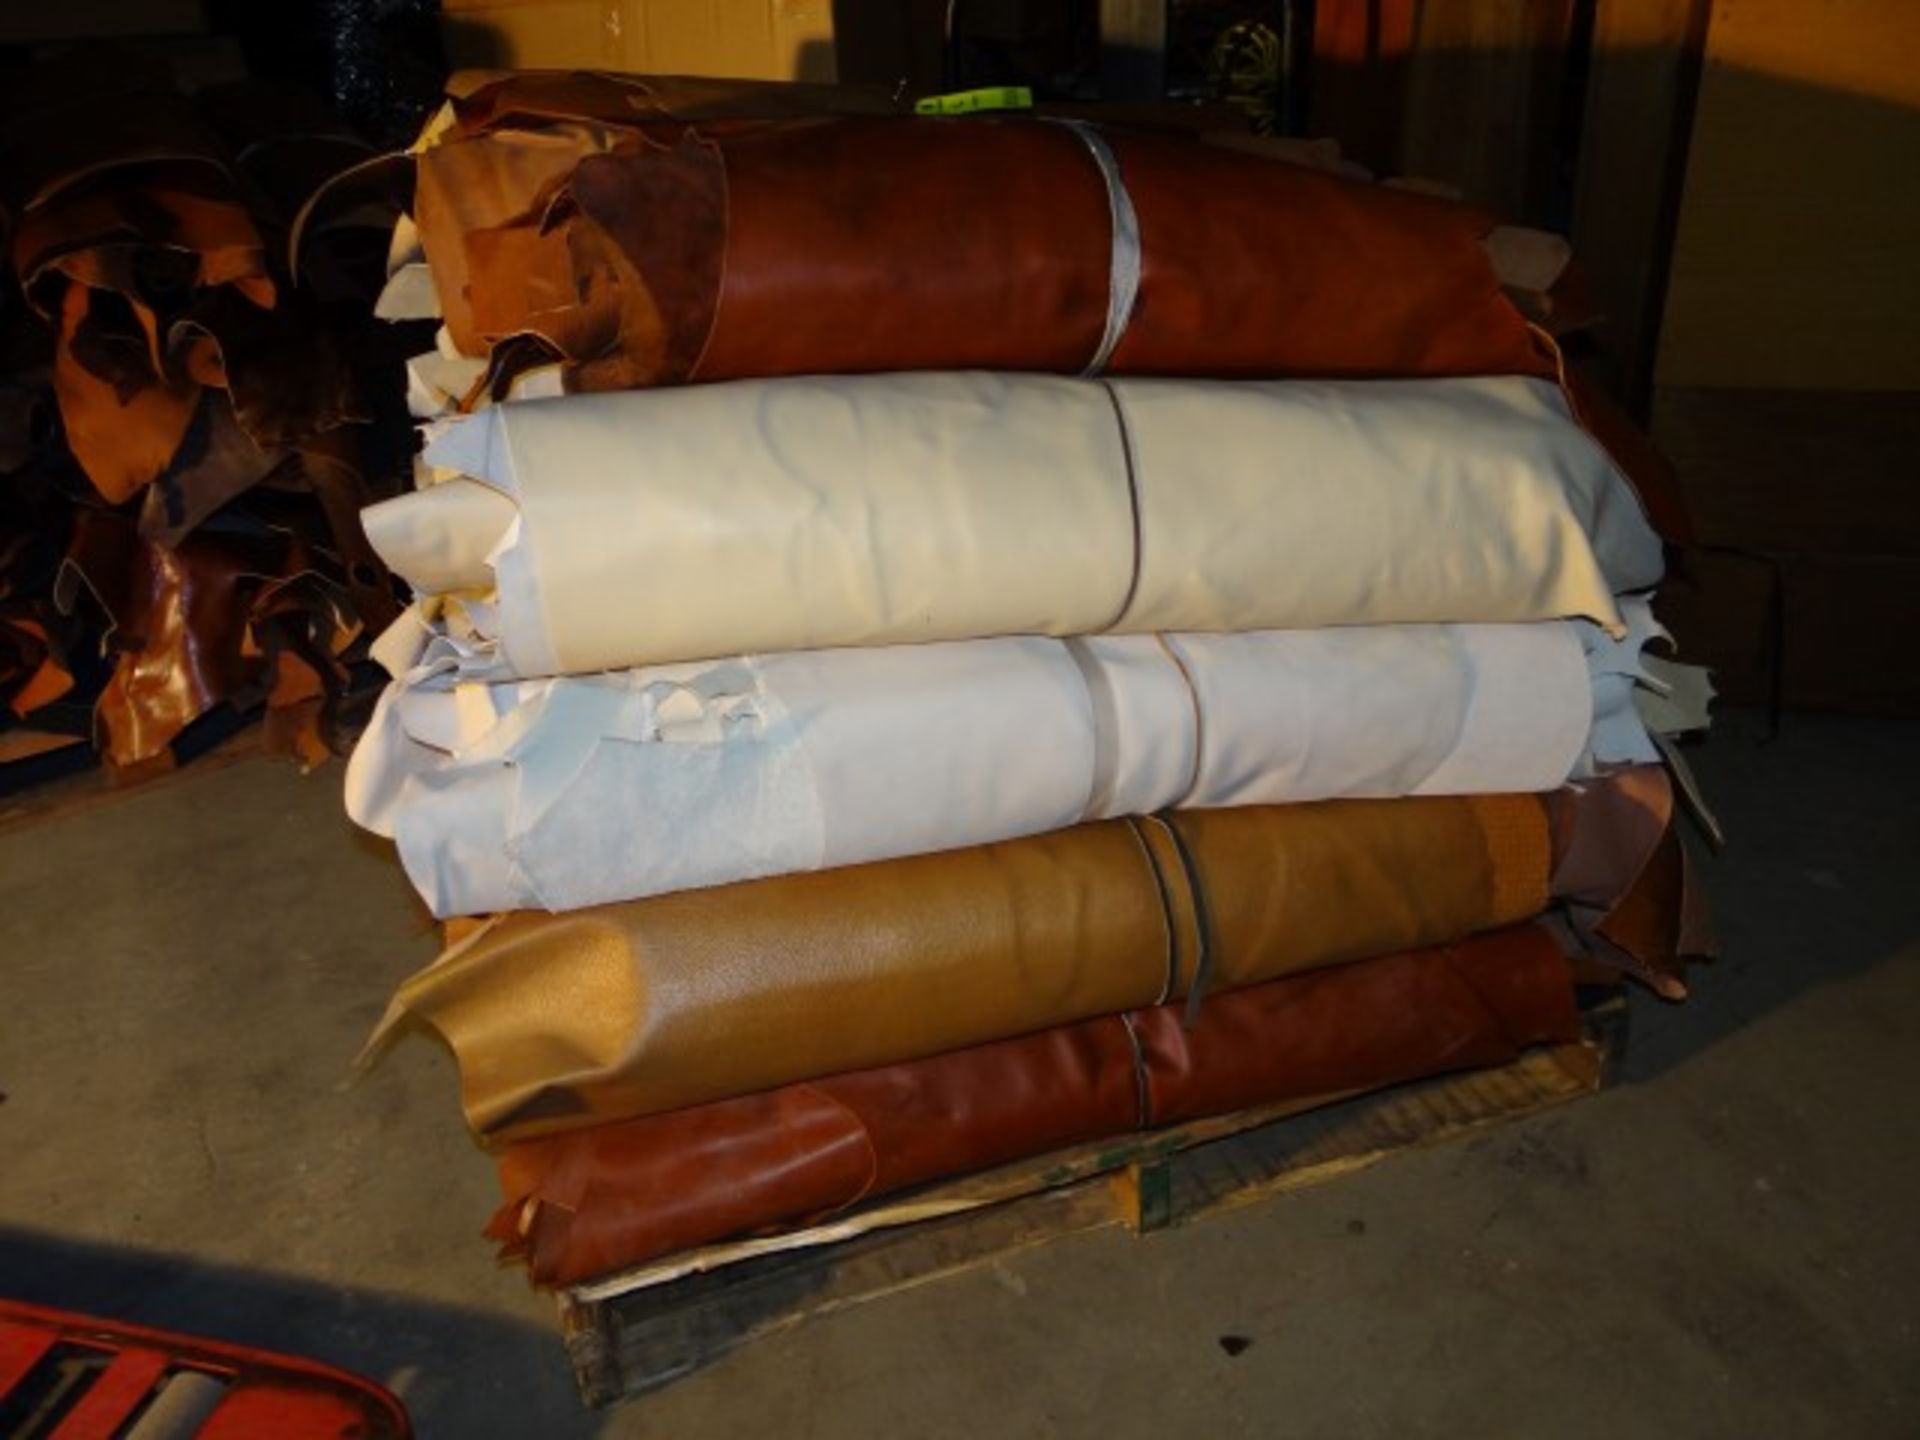 (600) Pounds of Leather. Assorted Colors and Thicknesses. Each Piece is at least 10 Sq.Ft. - Image 2 of 4